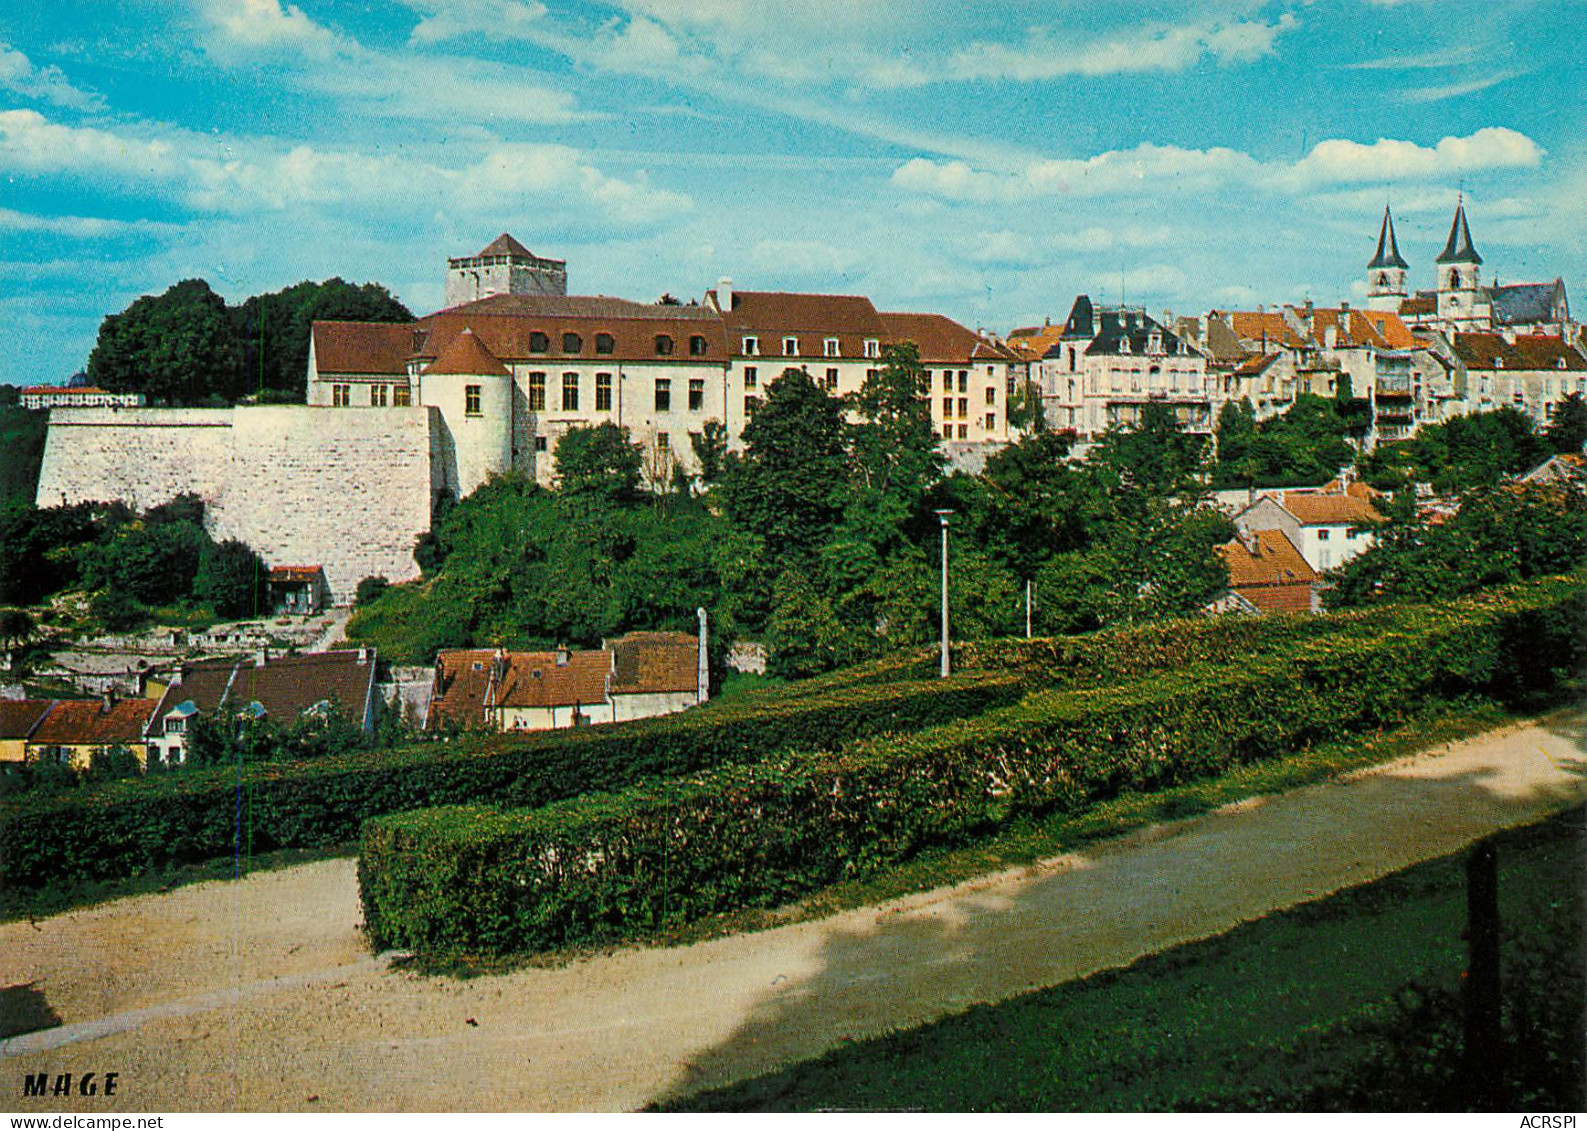 CHAUMONT  Panorama  43 (scan Recto-verso)MA2286Bis - Chaumont